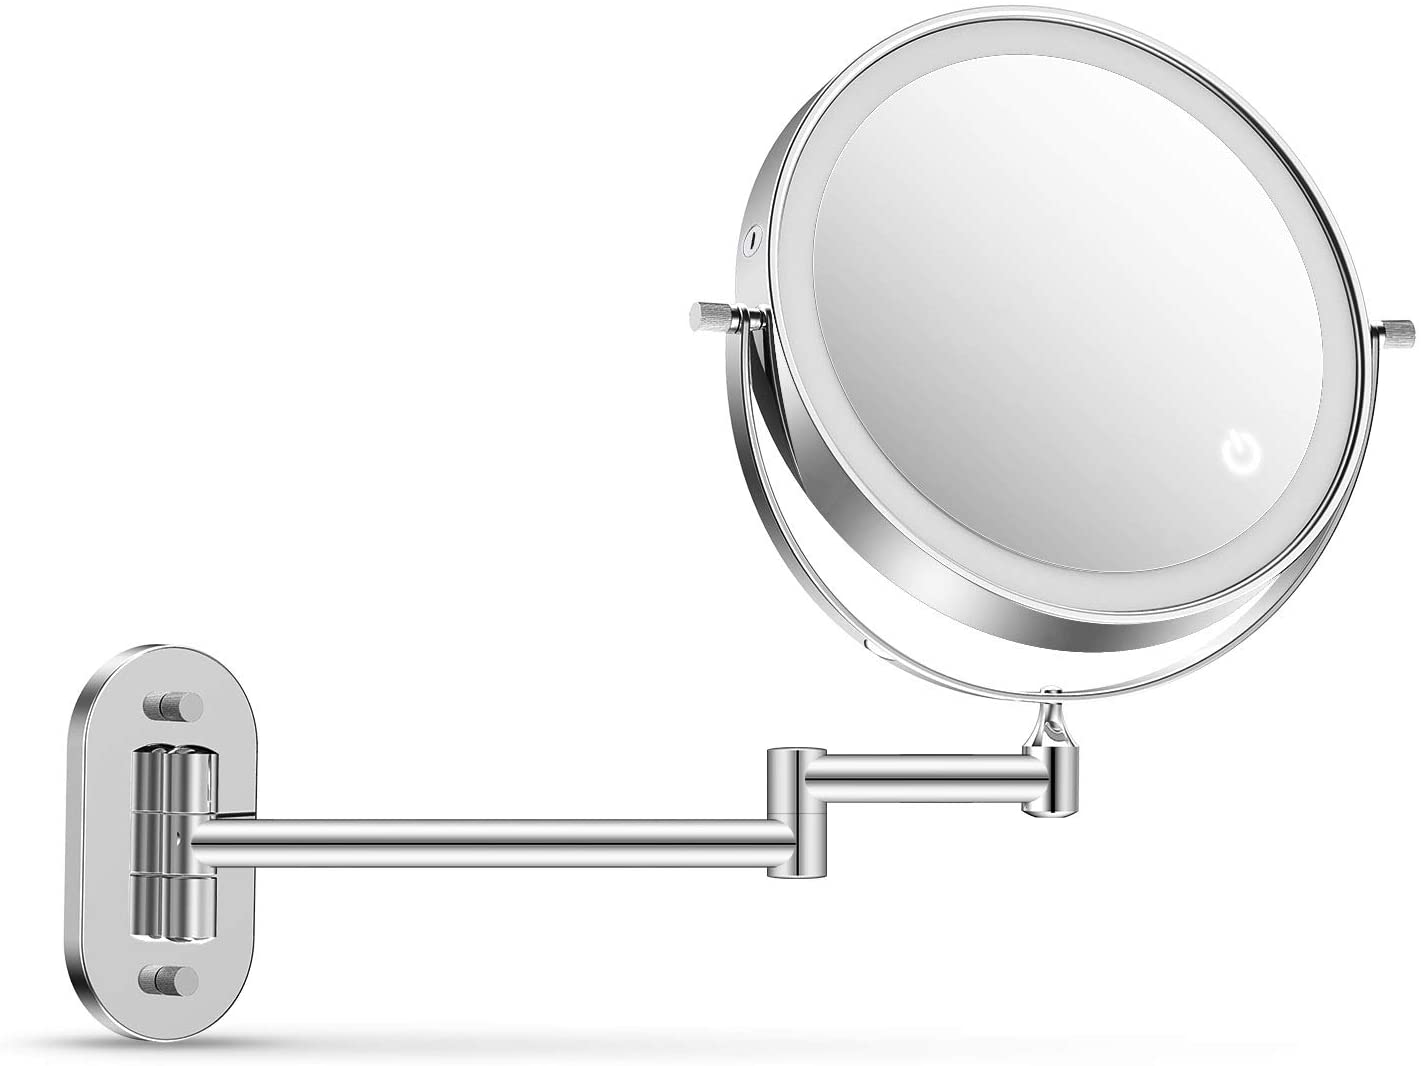 Alvorog 1X/5X Wall Mounted Makeup Mirror, Power Supply Touch Screen,  Extendable Magnifying Mirrors with Color Lighting Modes, 360°  Swivel,Timing Function ,8inch,Round